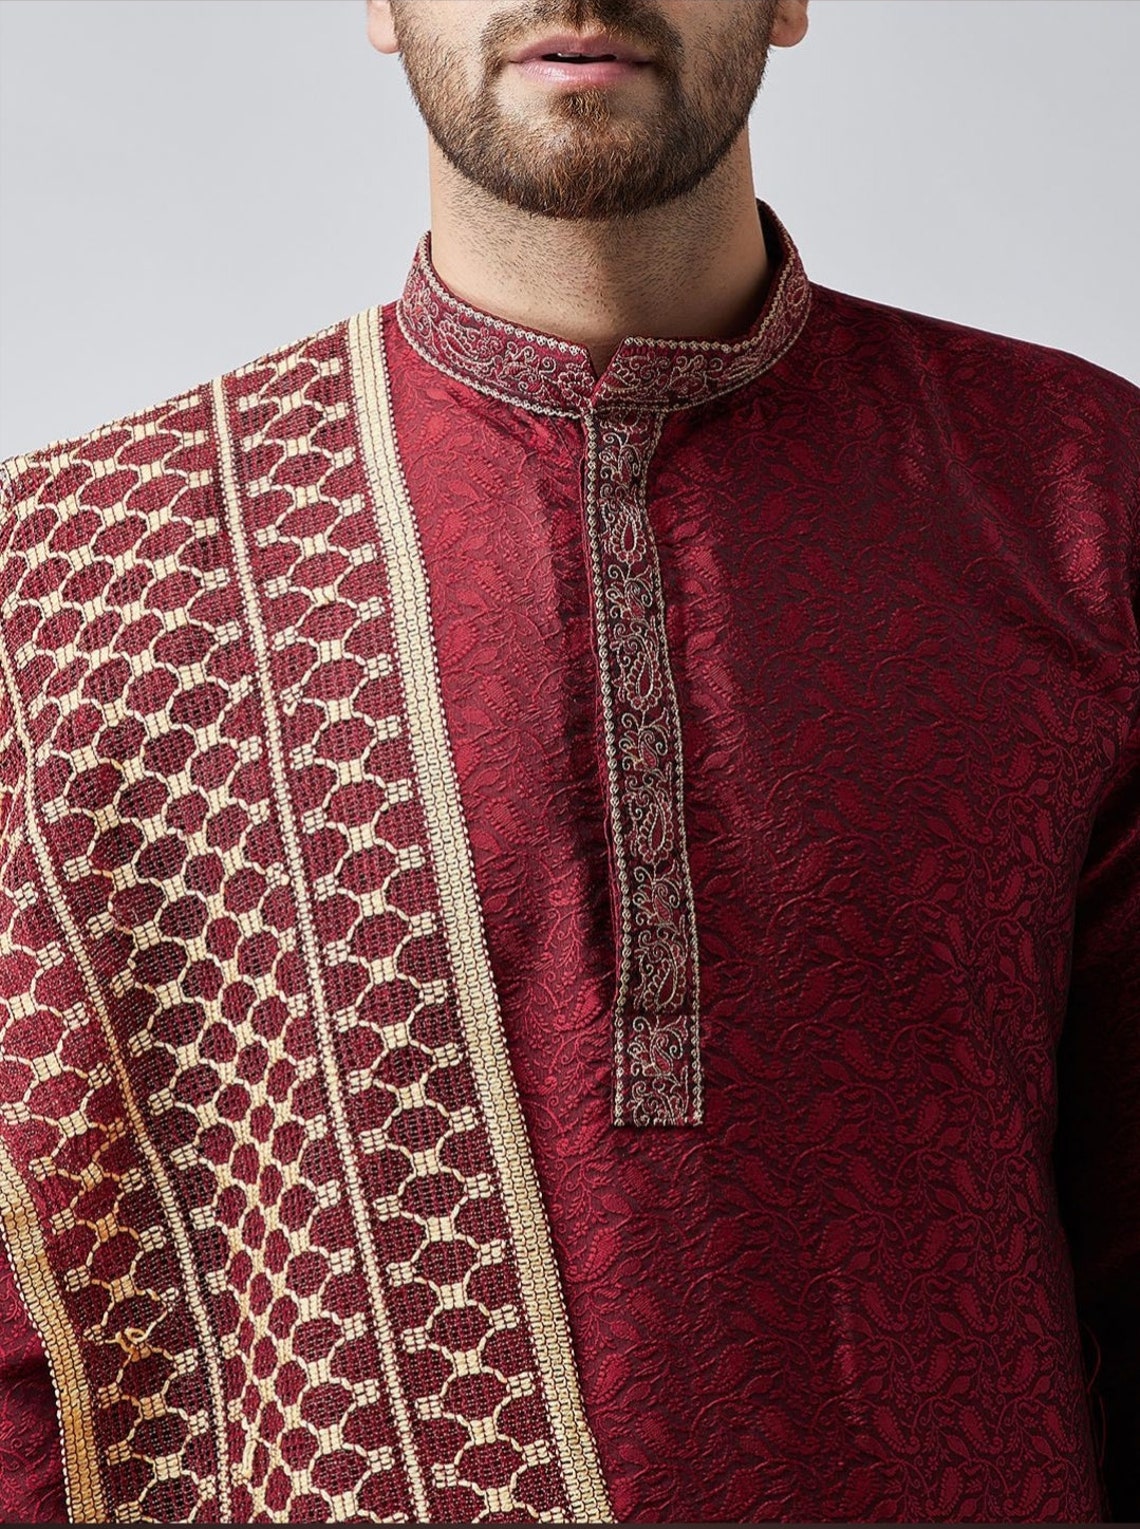 Dupatta Stole for Men- Maroon/Gold Indian Clothing in Denver, CO, Aurora, CO, Boulder, CO, Fort Collins, CO, Colorado Springs, CO, Parker, CO, Highlands Ranch, CO, Cherry Creek, CO, Centennial, CO, and Longmont, CO. NATIONWIDE SHIPPING USA- India Fashion X